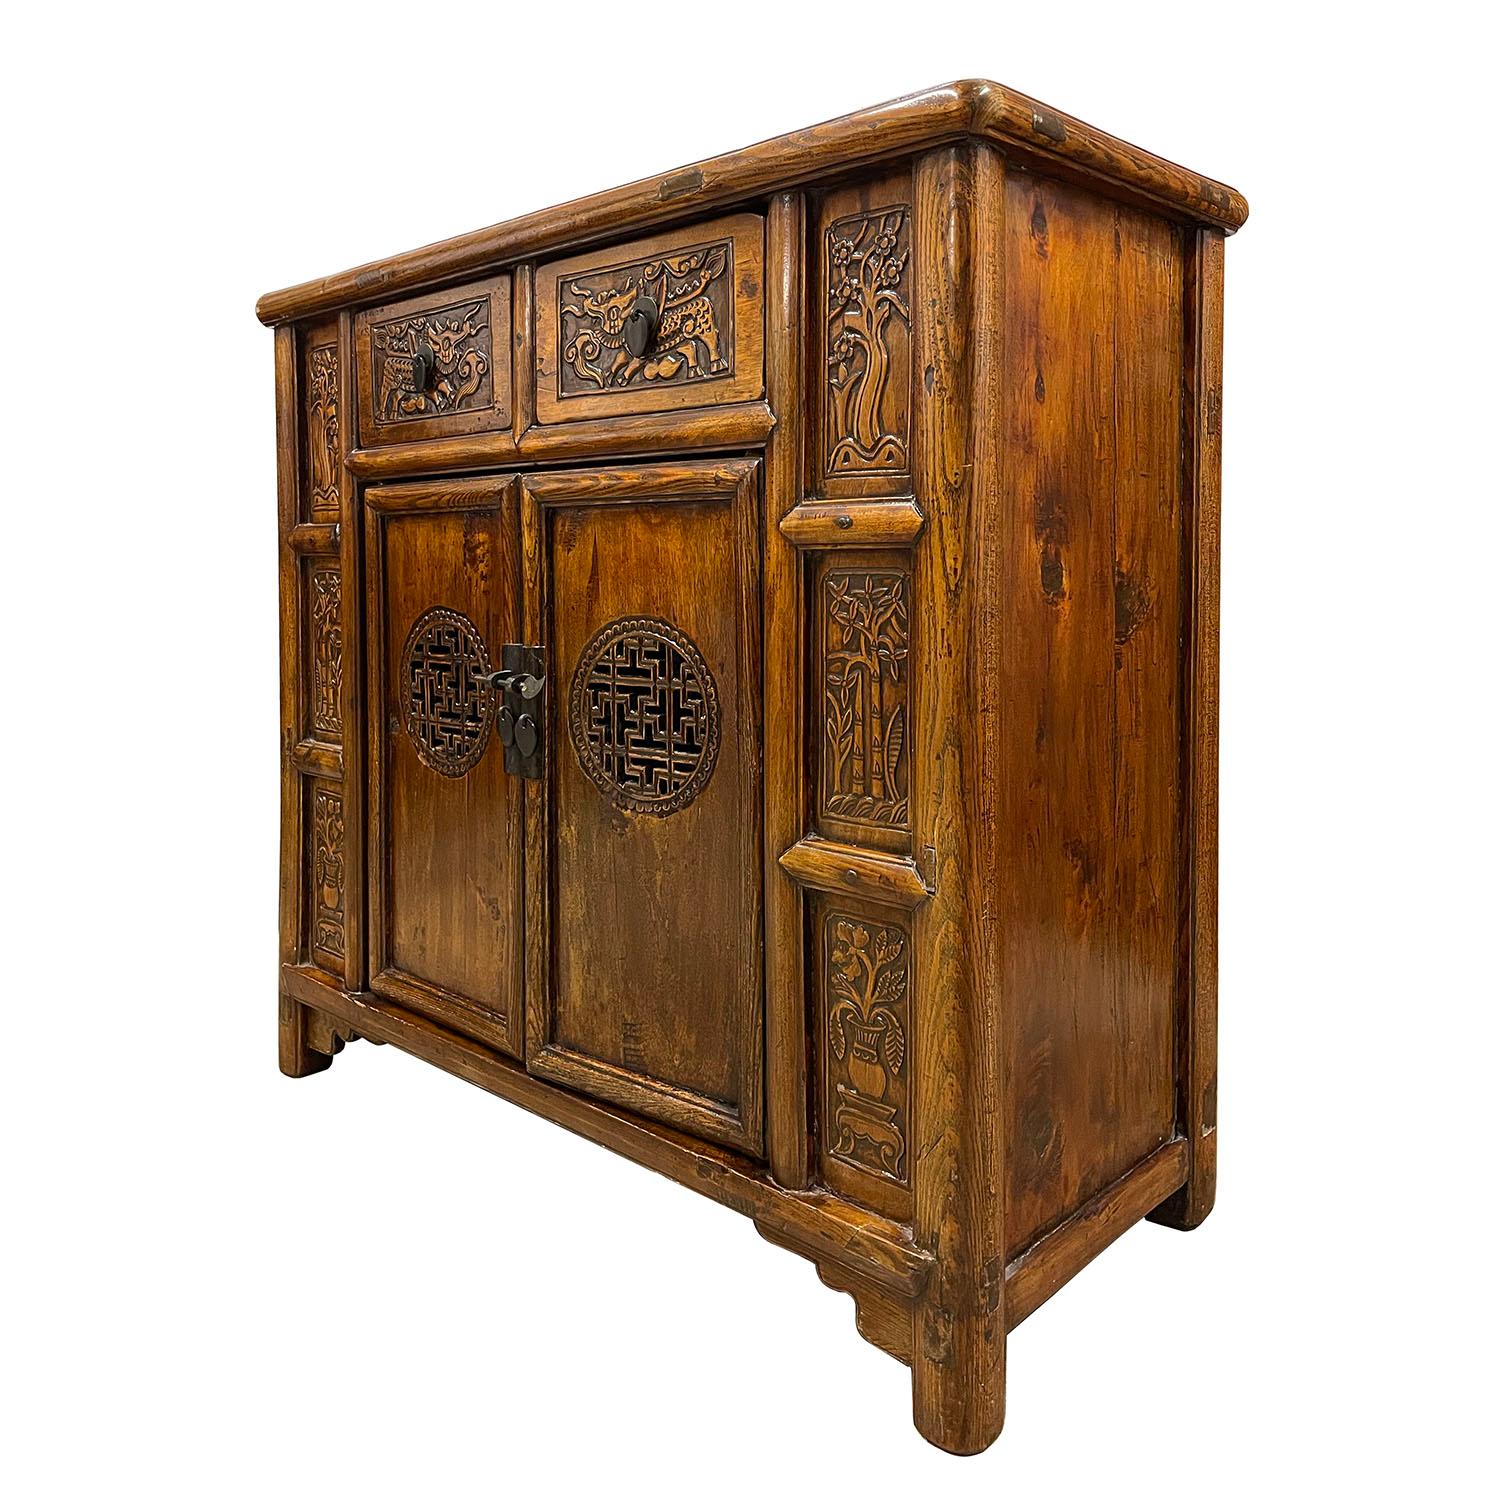 Size: 39 1/2inH x 40in W x 17in D
Door opening: 24 1/2in H x 20 1/2in W
Drawer: 5 1/2in H x 10in W x 11in D            
Origin: China
Circa: 1850 - 1900
Material: Wood
Condition: Original finished. Solid wood construction, hand made, well balanced,